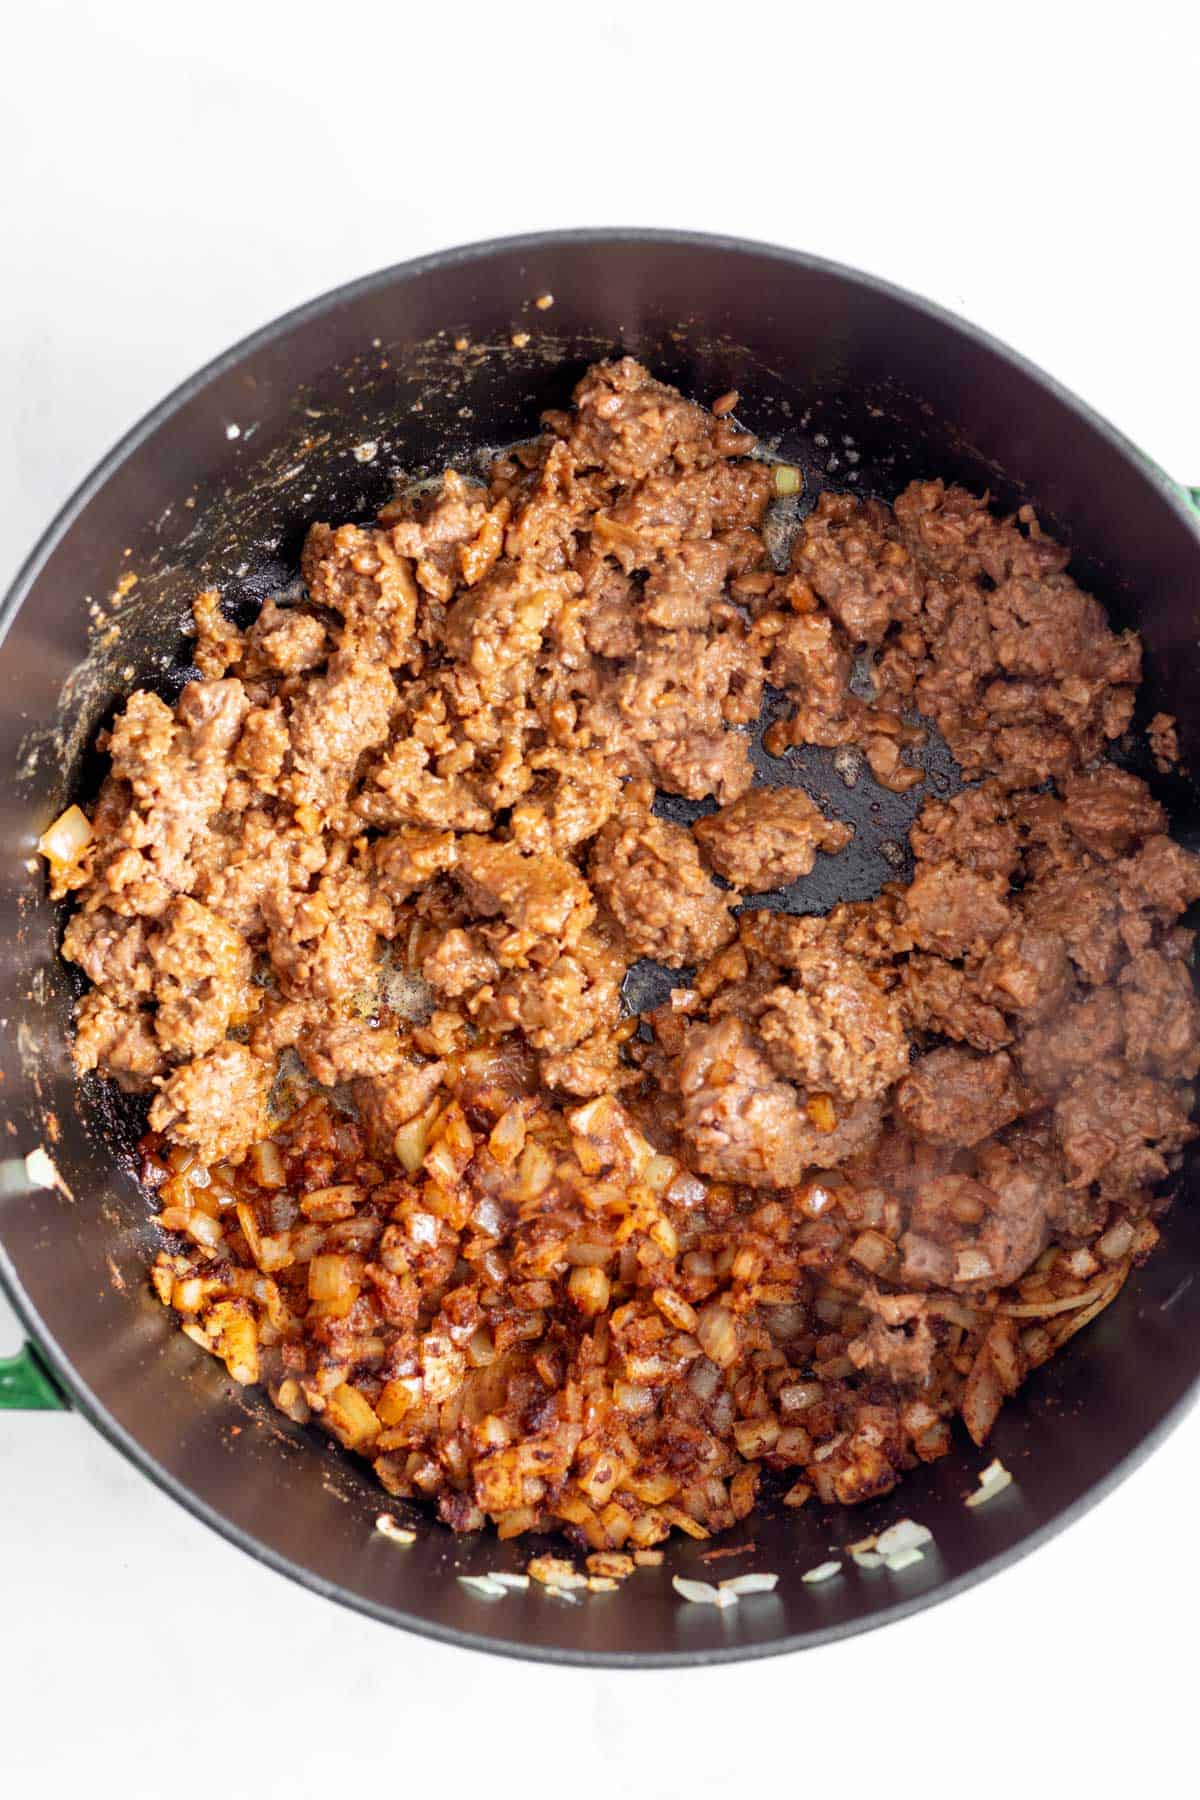 Vegan ground beef after browning for 8 minutes.